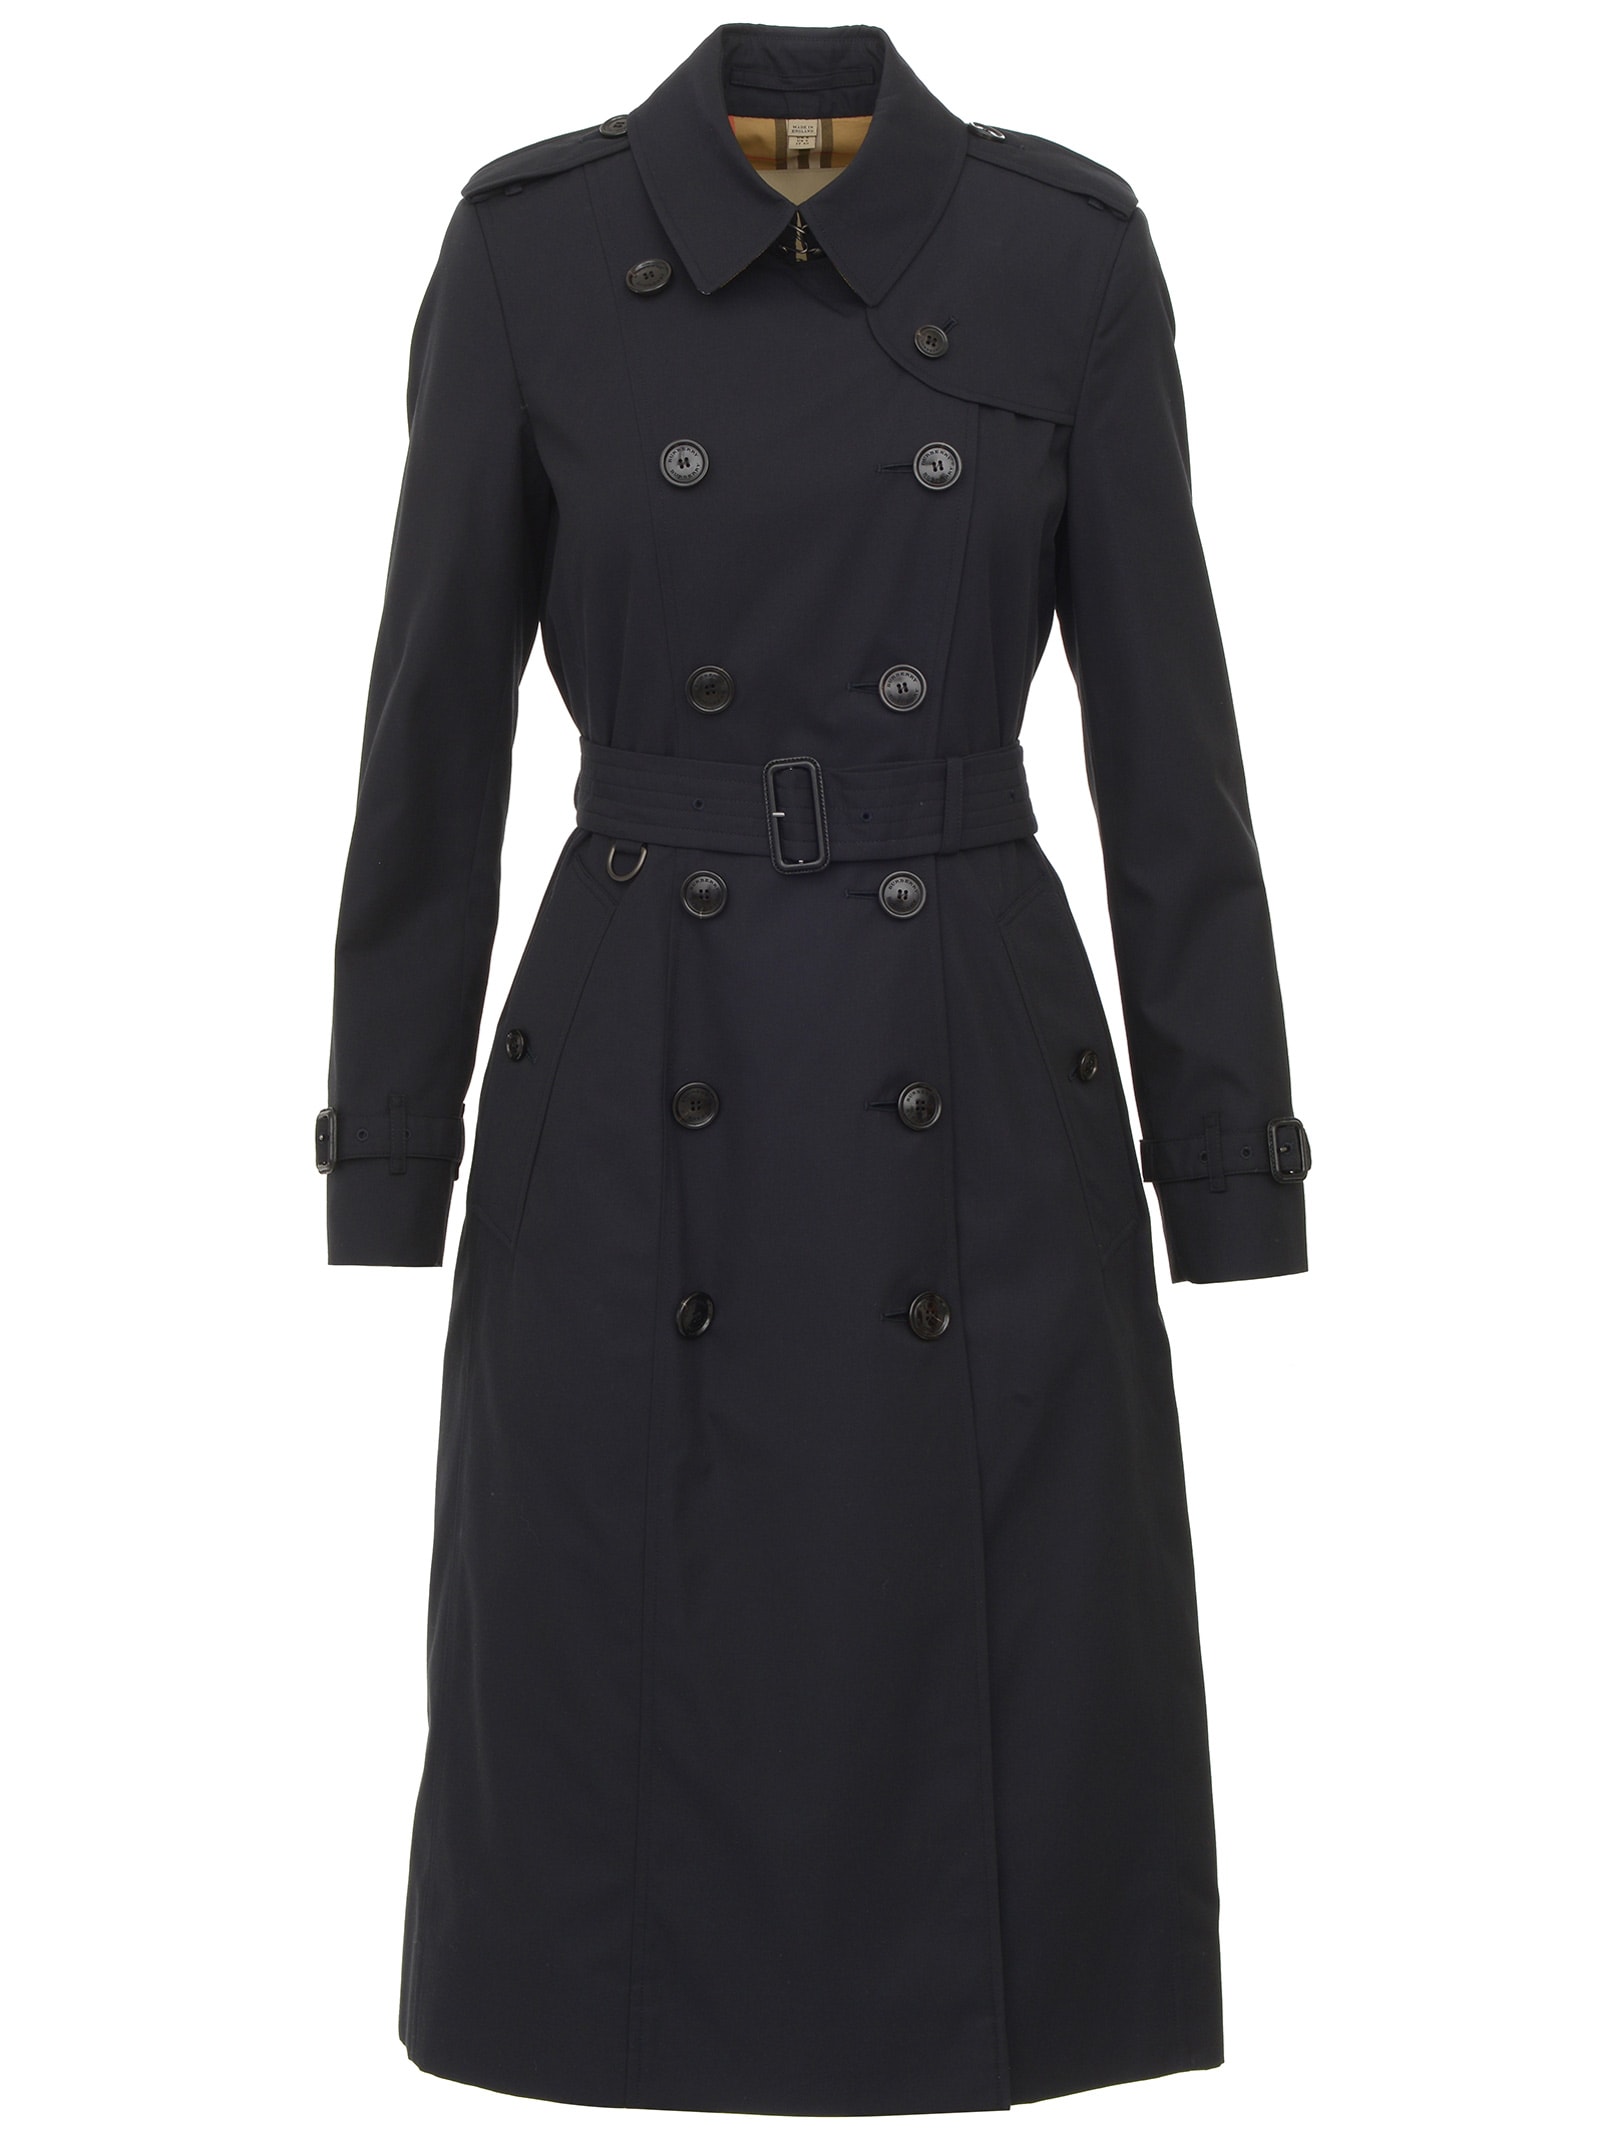 burberry trench blue